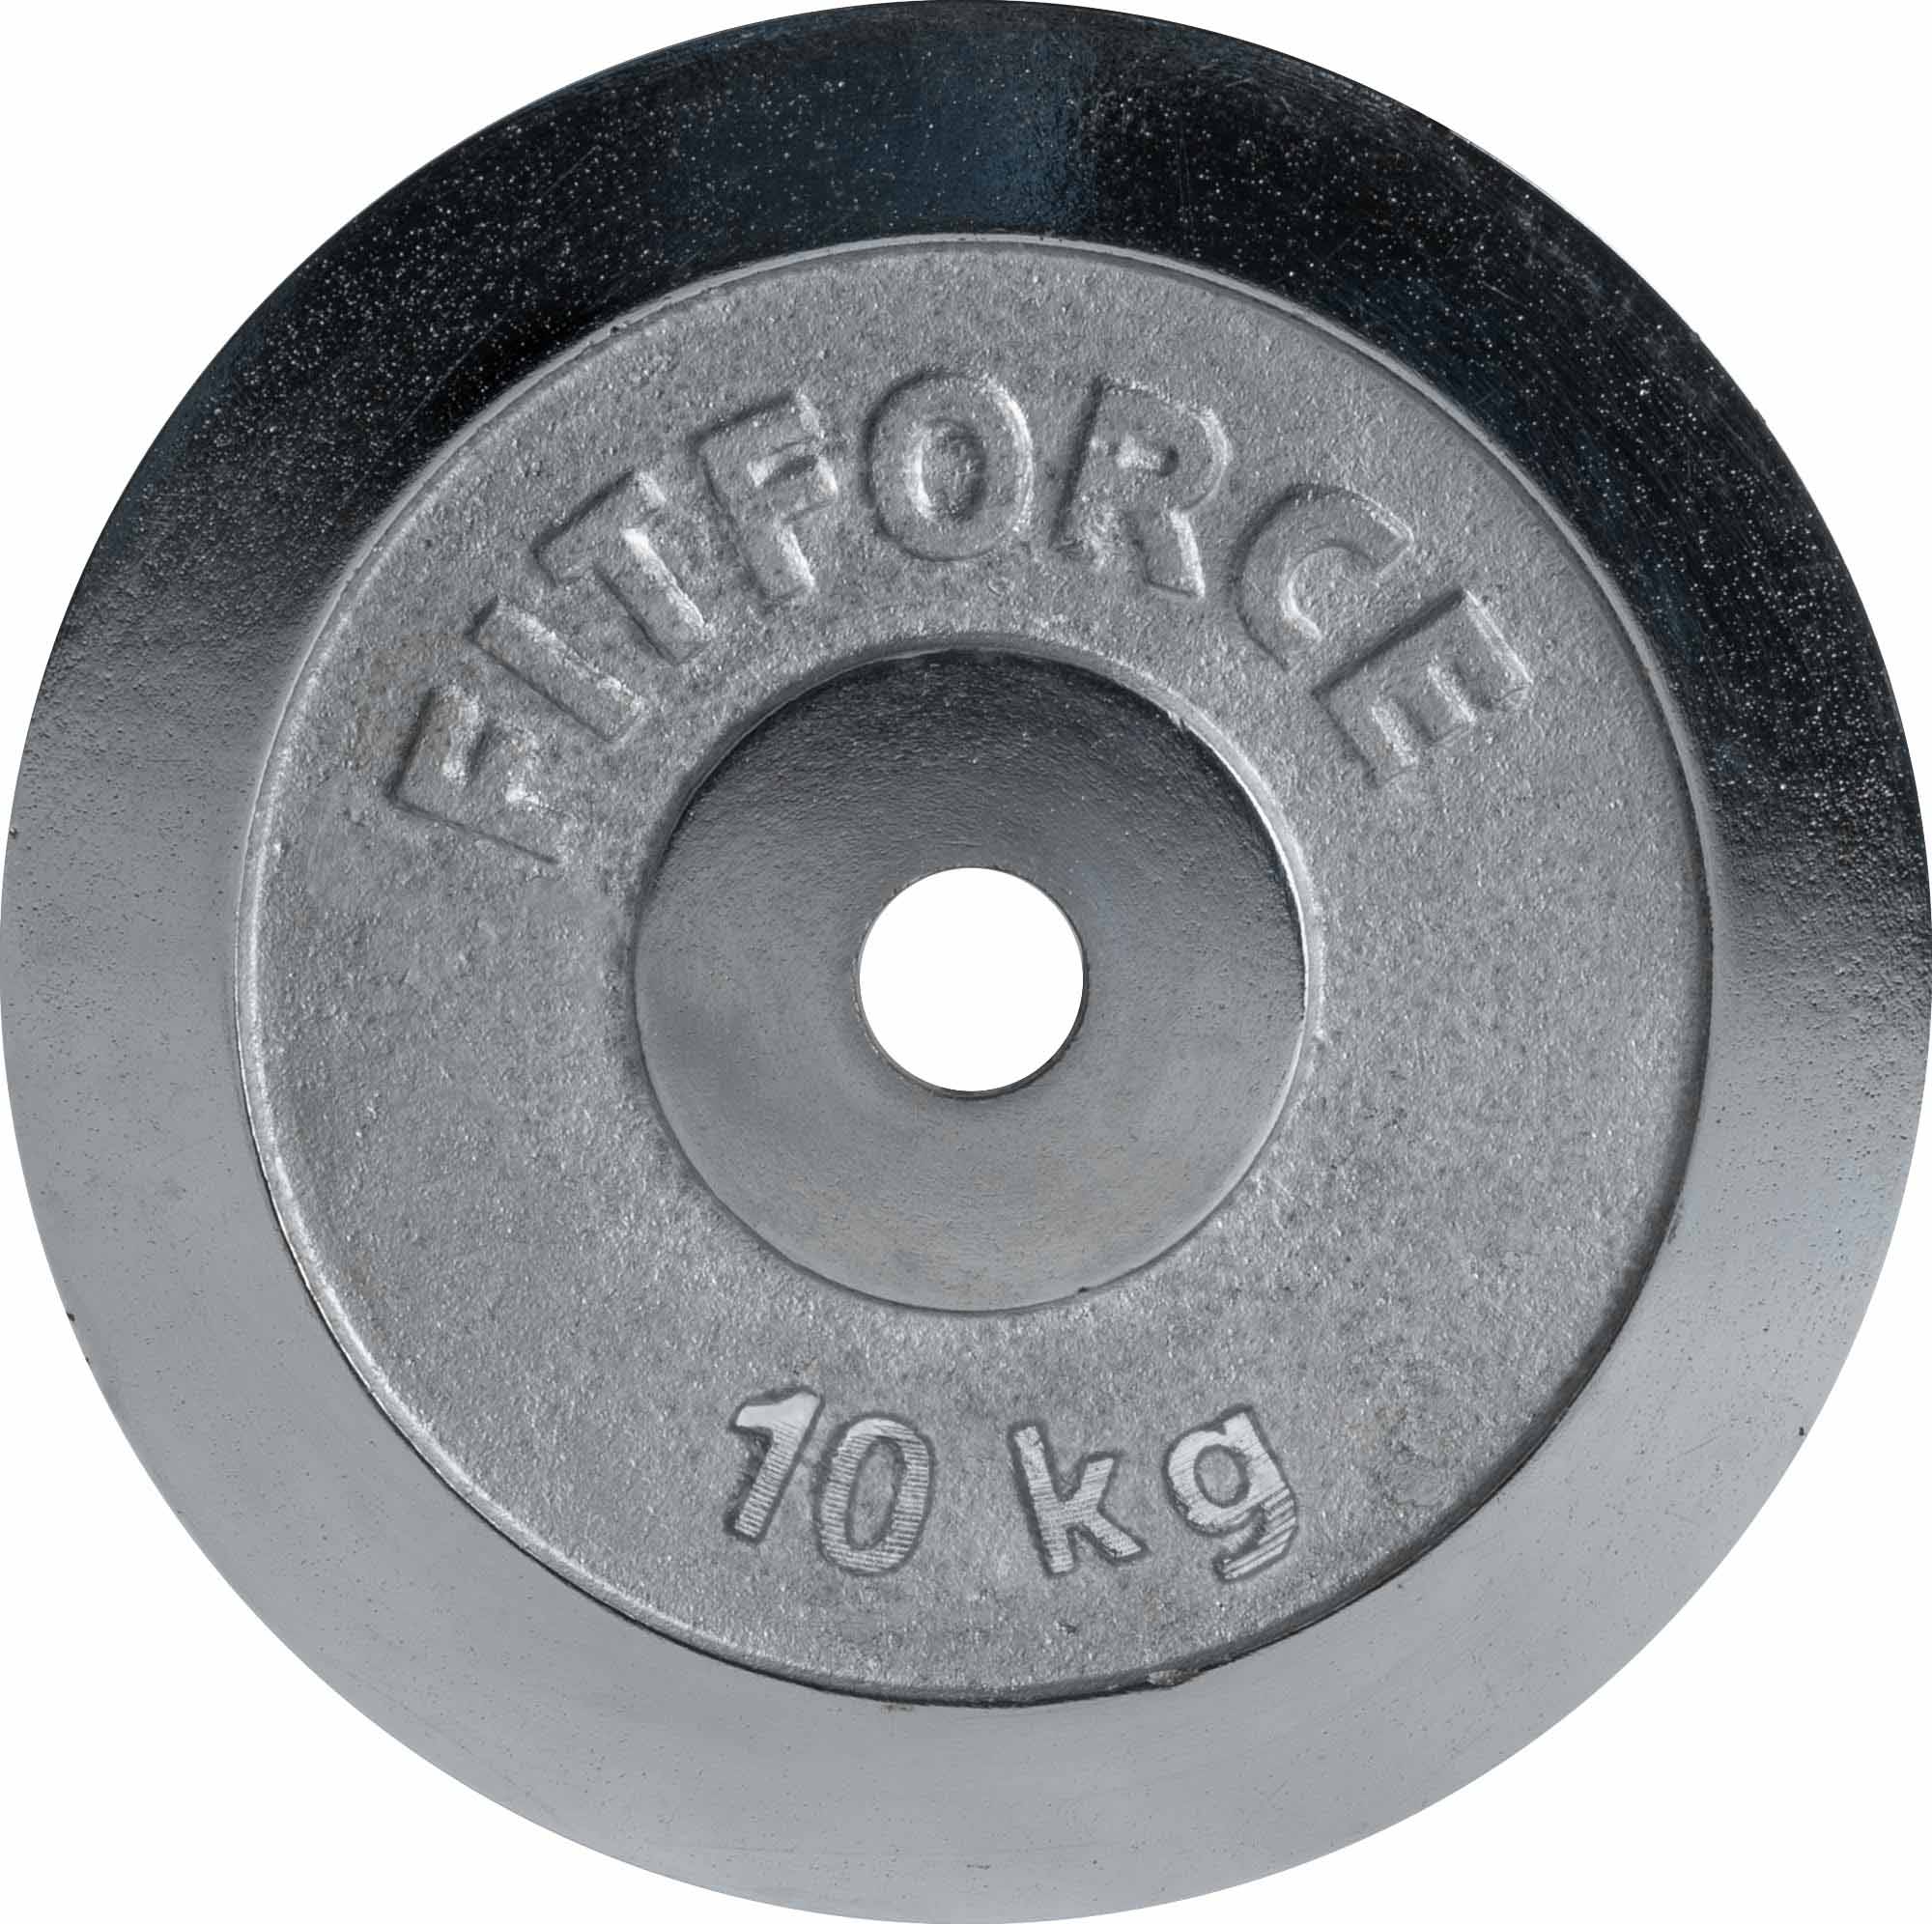 WEIGHT DISC PLATE 10KG CHROME - Weight Disc Plate